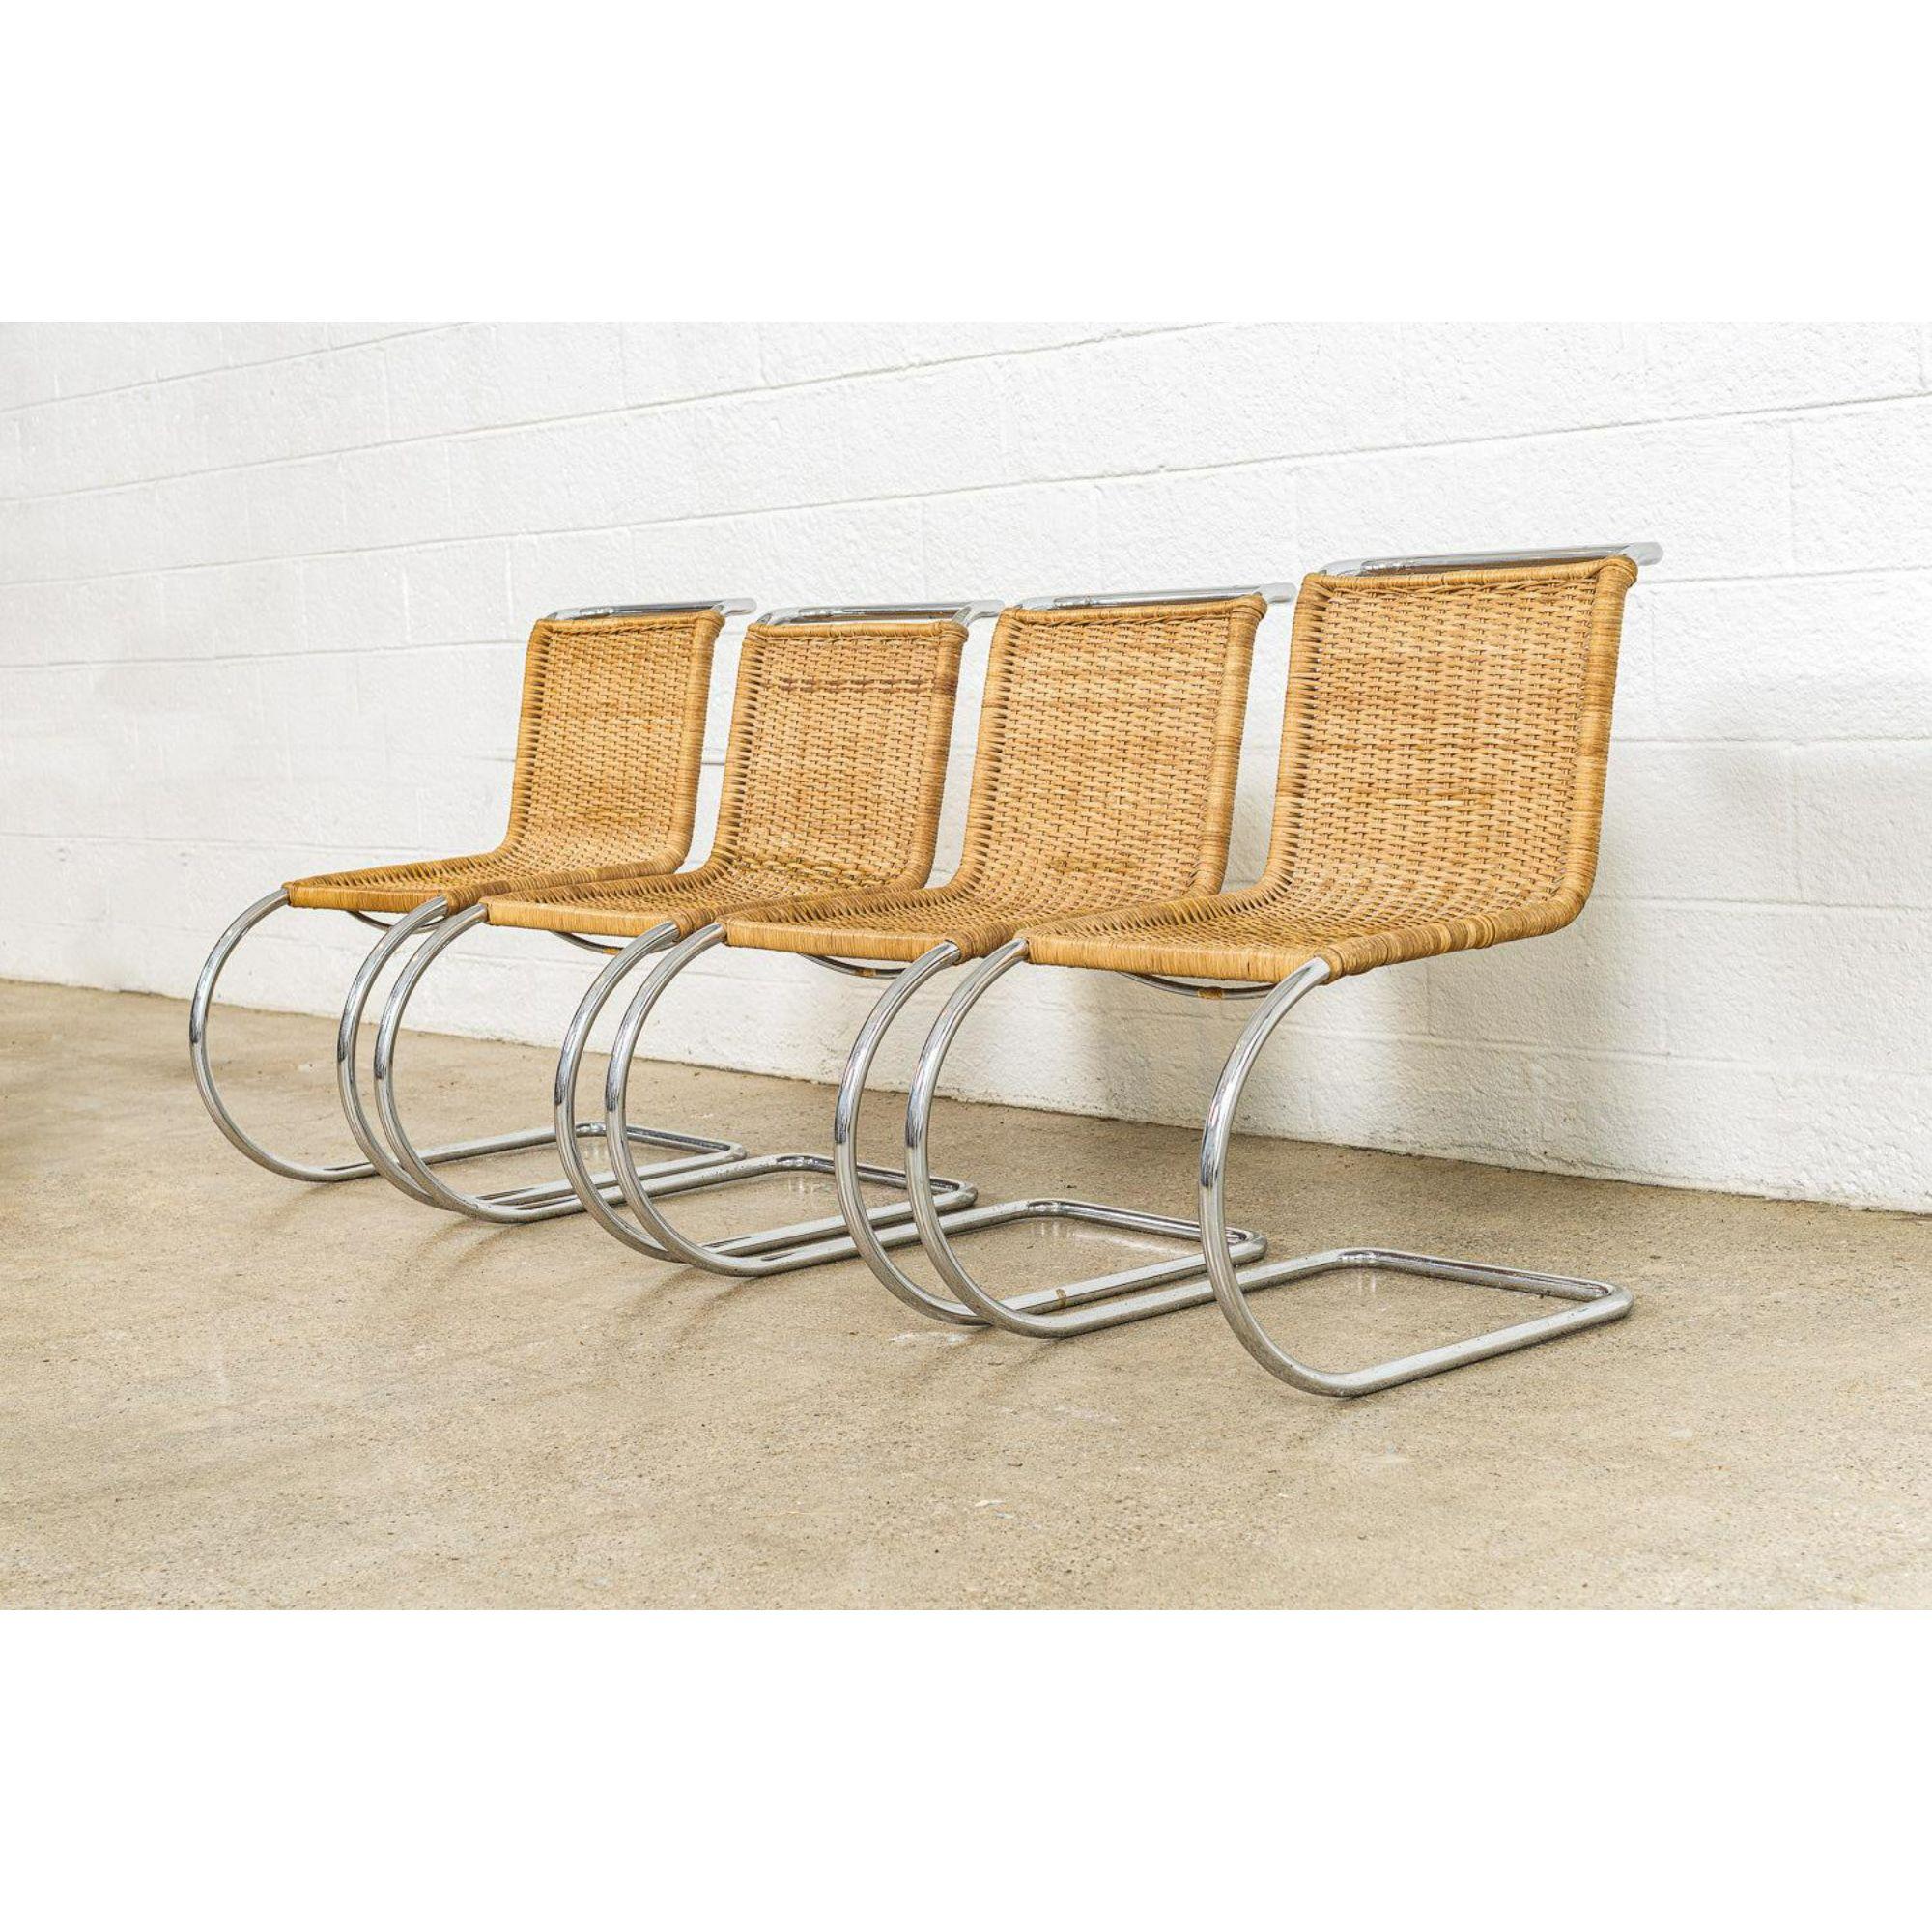 This set of vintage Mies van der Rohe MR 10 cantilevered cane side chairs produced by Stendig are circa 1970. The MR chair was designed by modernist architect Mies van der Rohe in 1927 as part of his contribution to the Weissenhof exhibit in